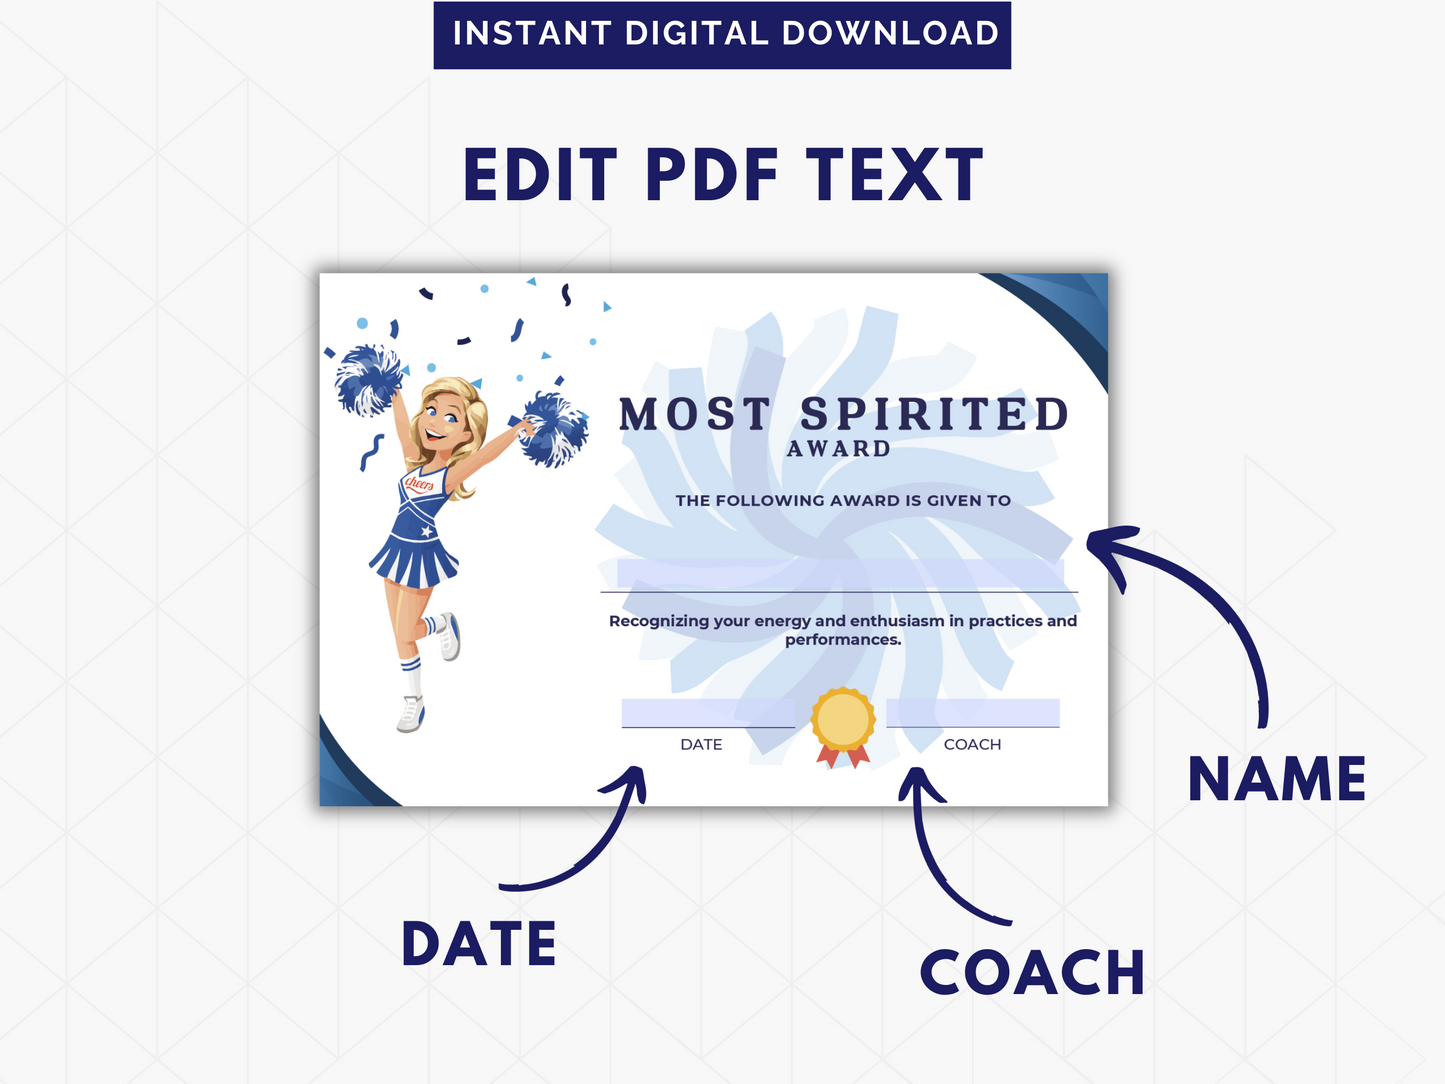 Cheerleading Certificate Template | Cheerleading Award for Cheer Competitions & Cheerleader Awards | 21 Awards for your Cheering Squad